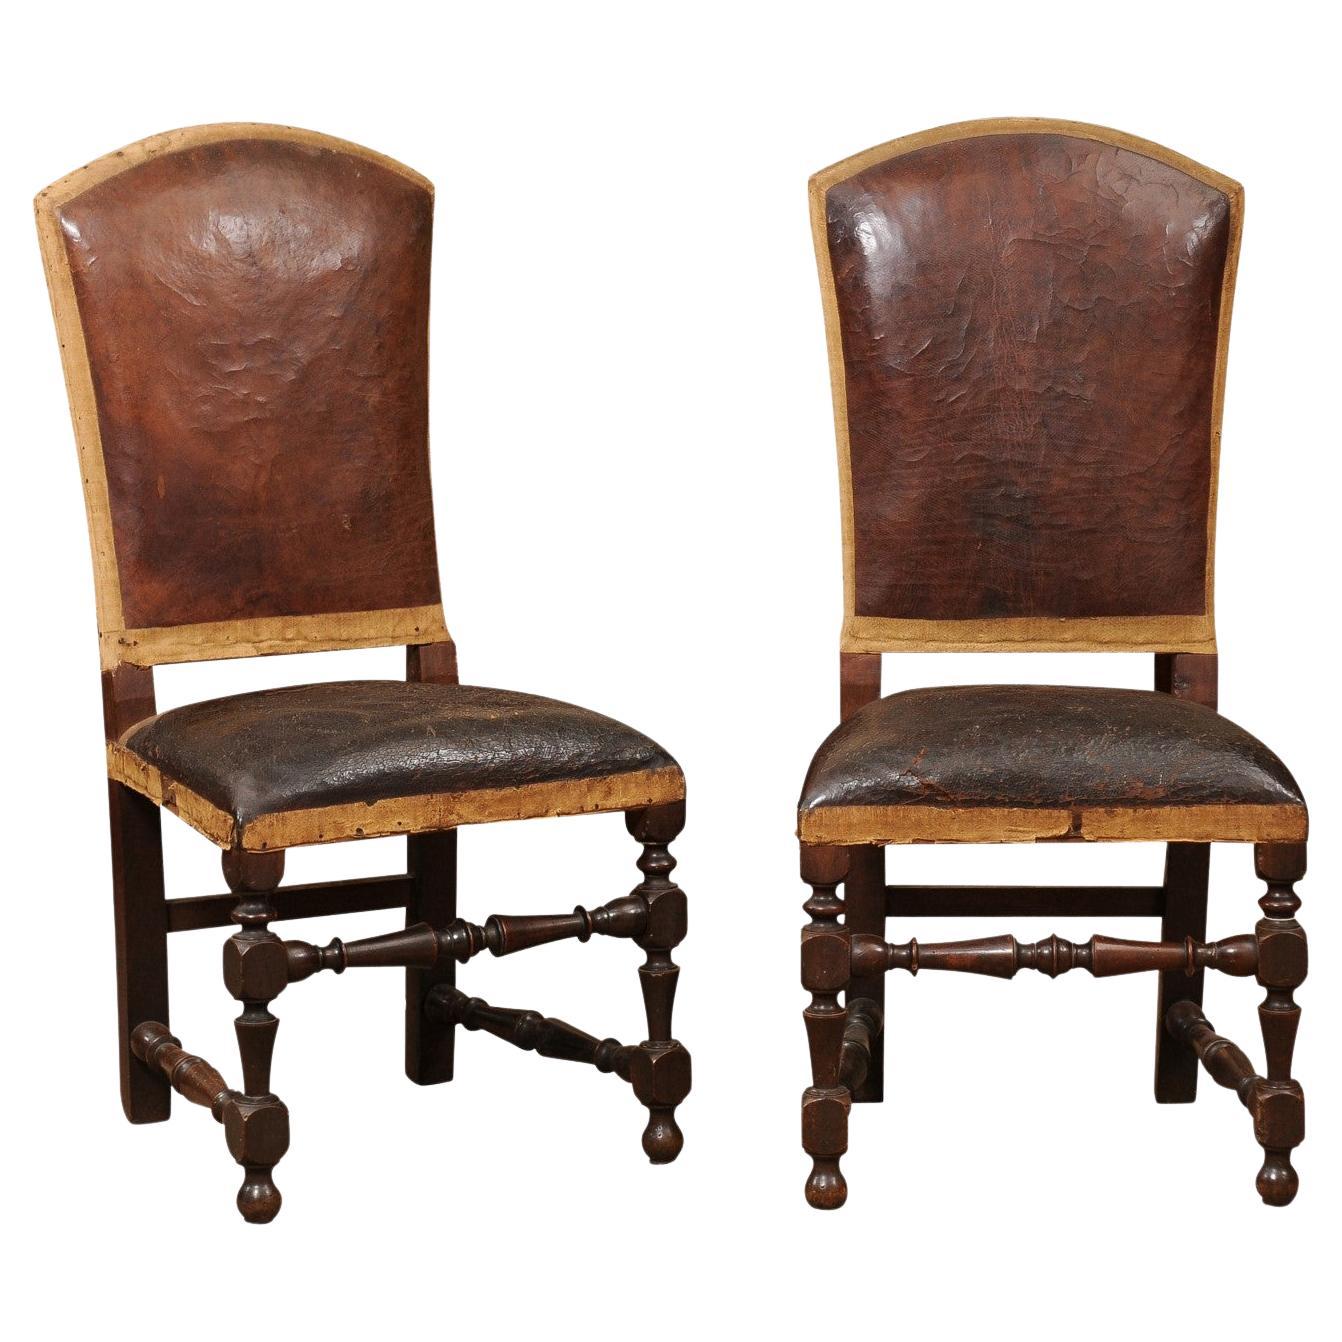 Pair of Large 18th Century Italian Walnut Hall Chairs with Leather Upholstery  For Sale